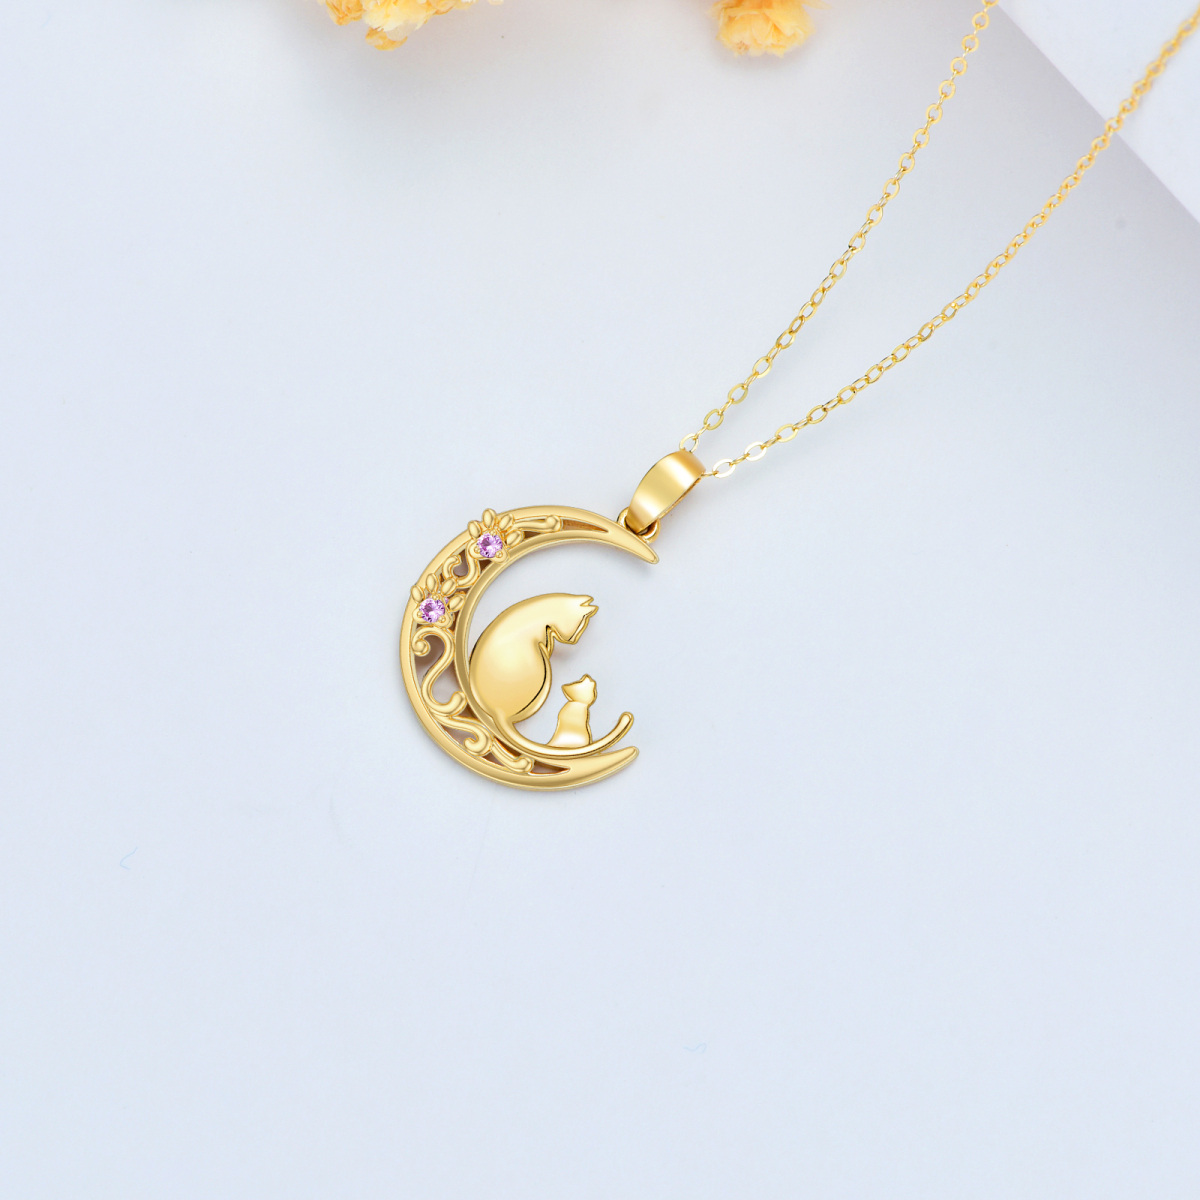 9K Gold Circular Shaped Cubic Zirconia Cat & Paw & Moon Pendant Necklace-4